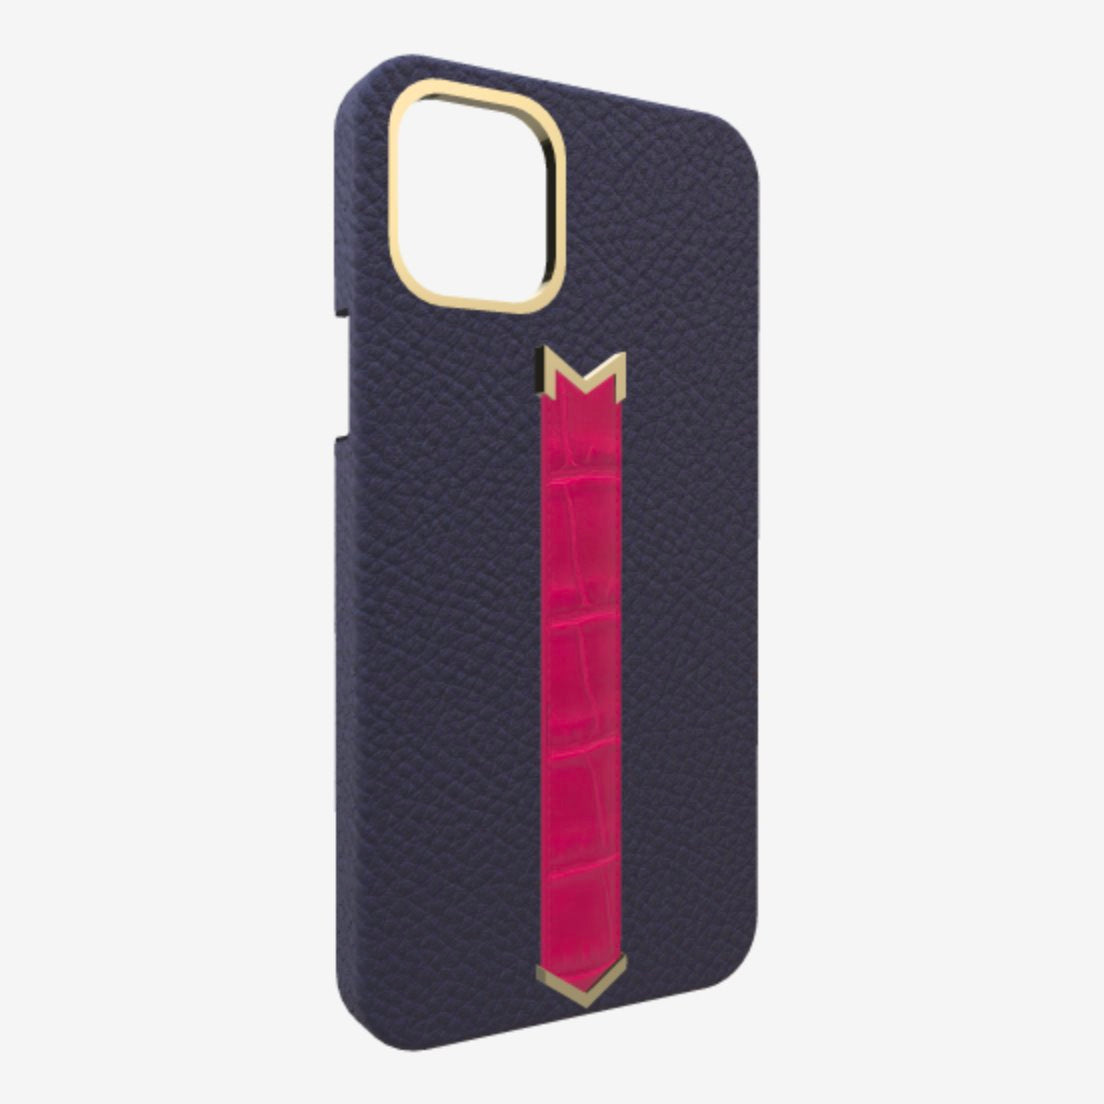 Gold Finger Strap Case for iPhone 13 Pro in Genuine Calfskin and Alligator Navy Blue Fuchsia Party 